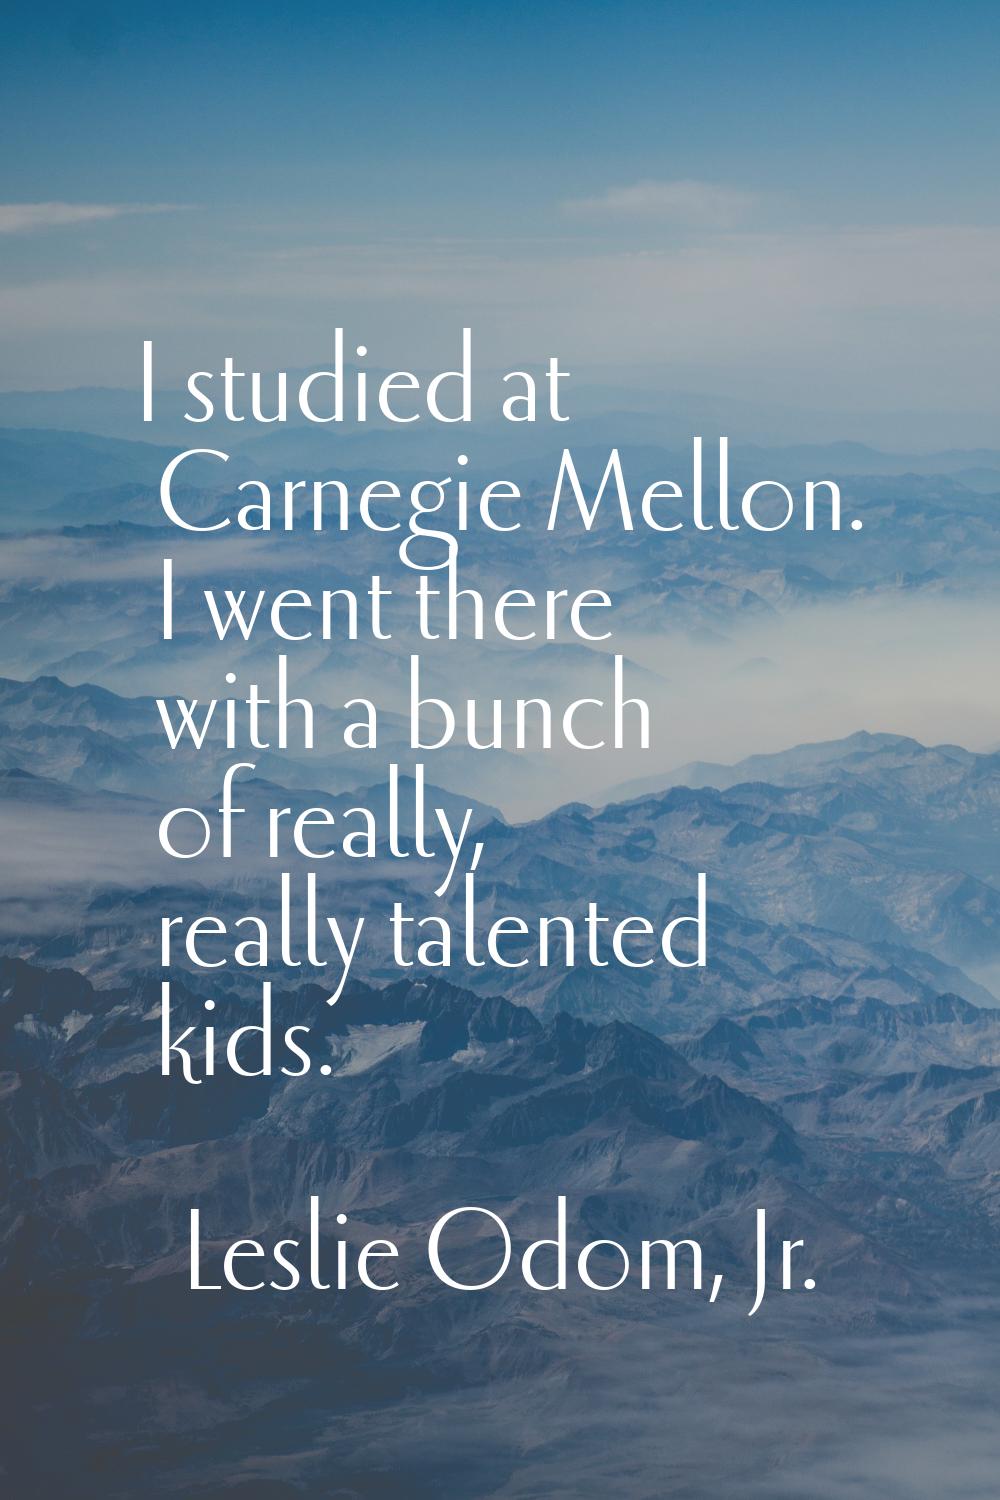 I studied at Carnegie Mellon. I went there with a bunch of really, really talented kids.